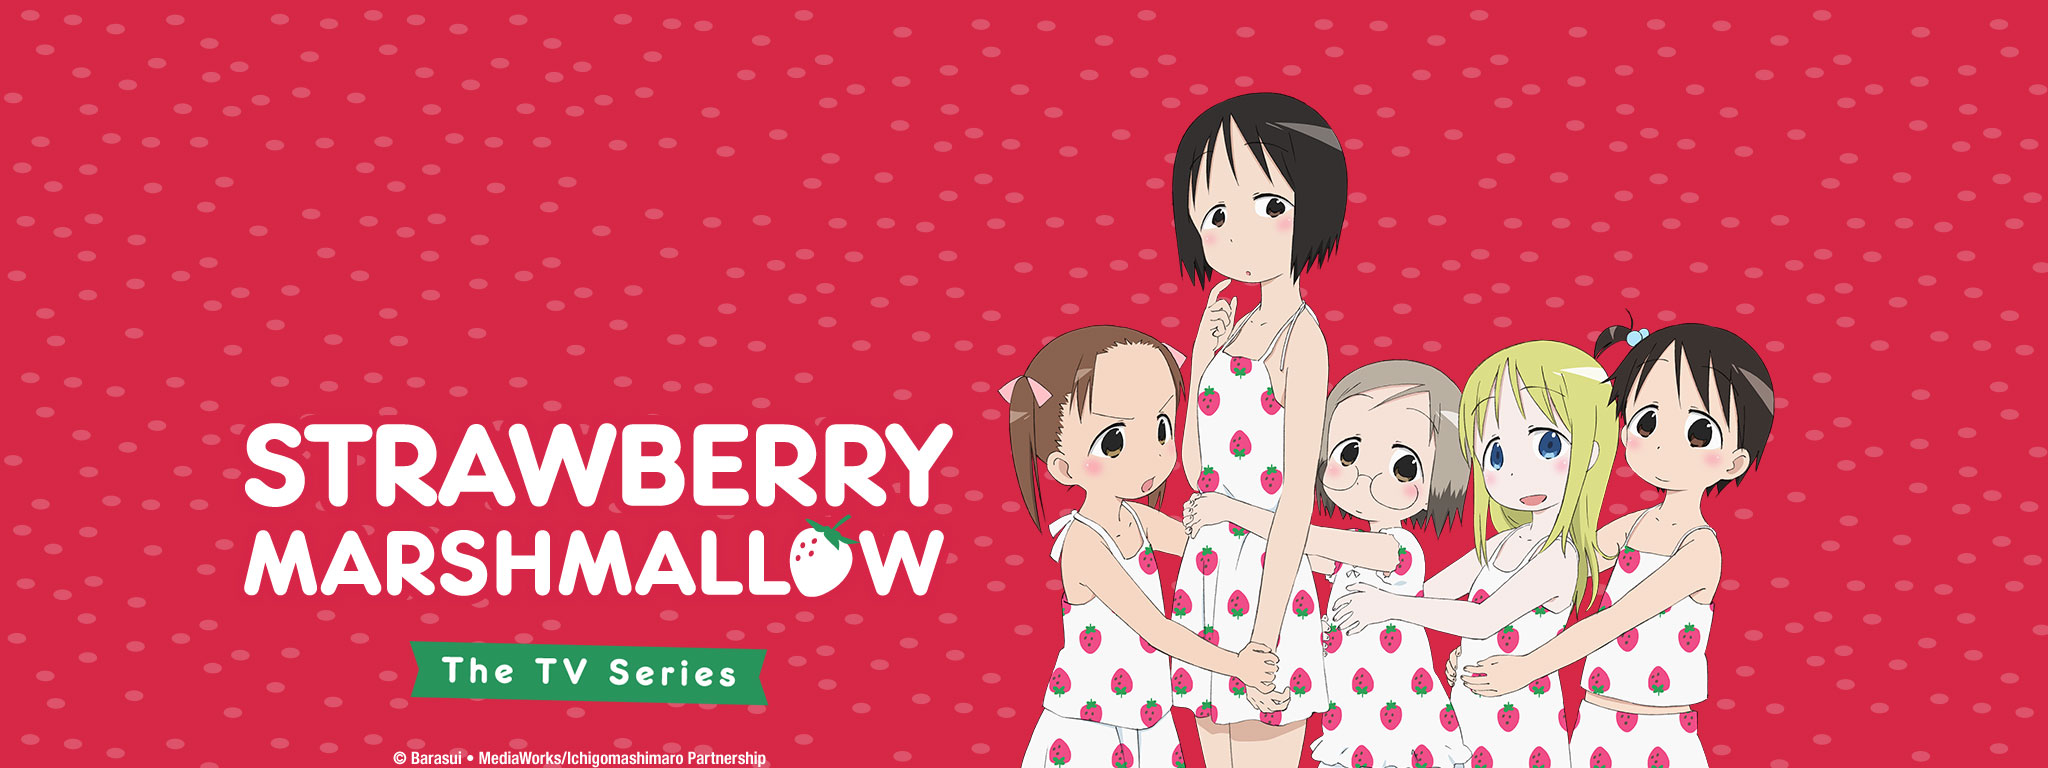 Title Art for Strawberry Marshmallow